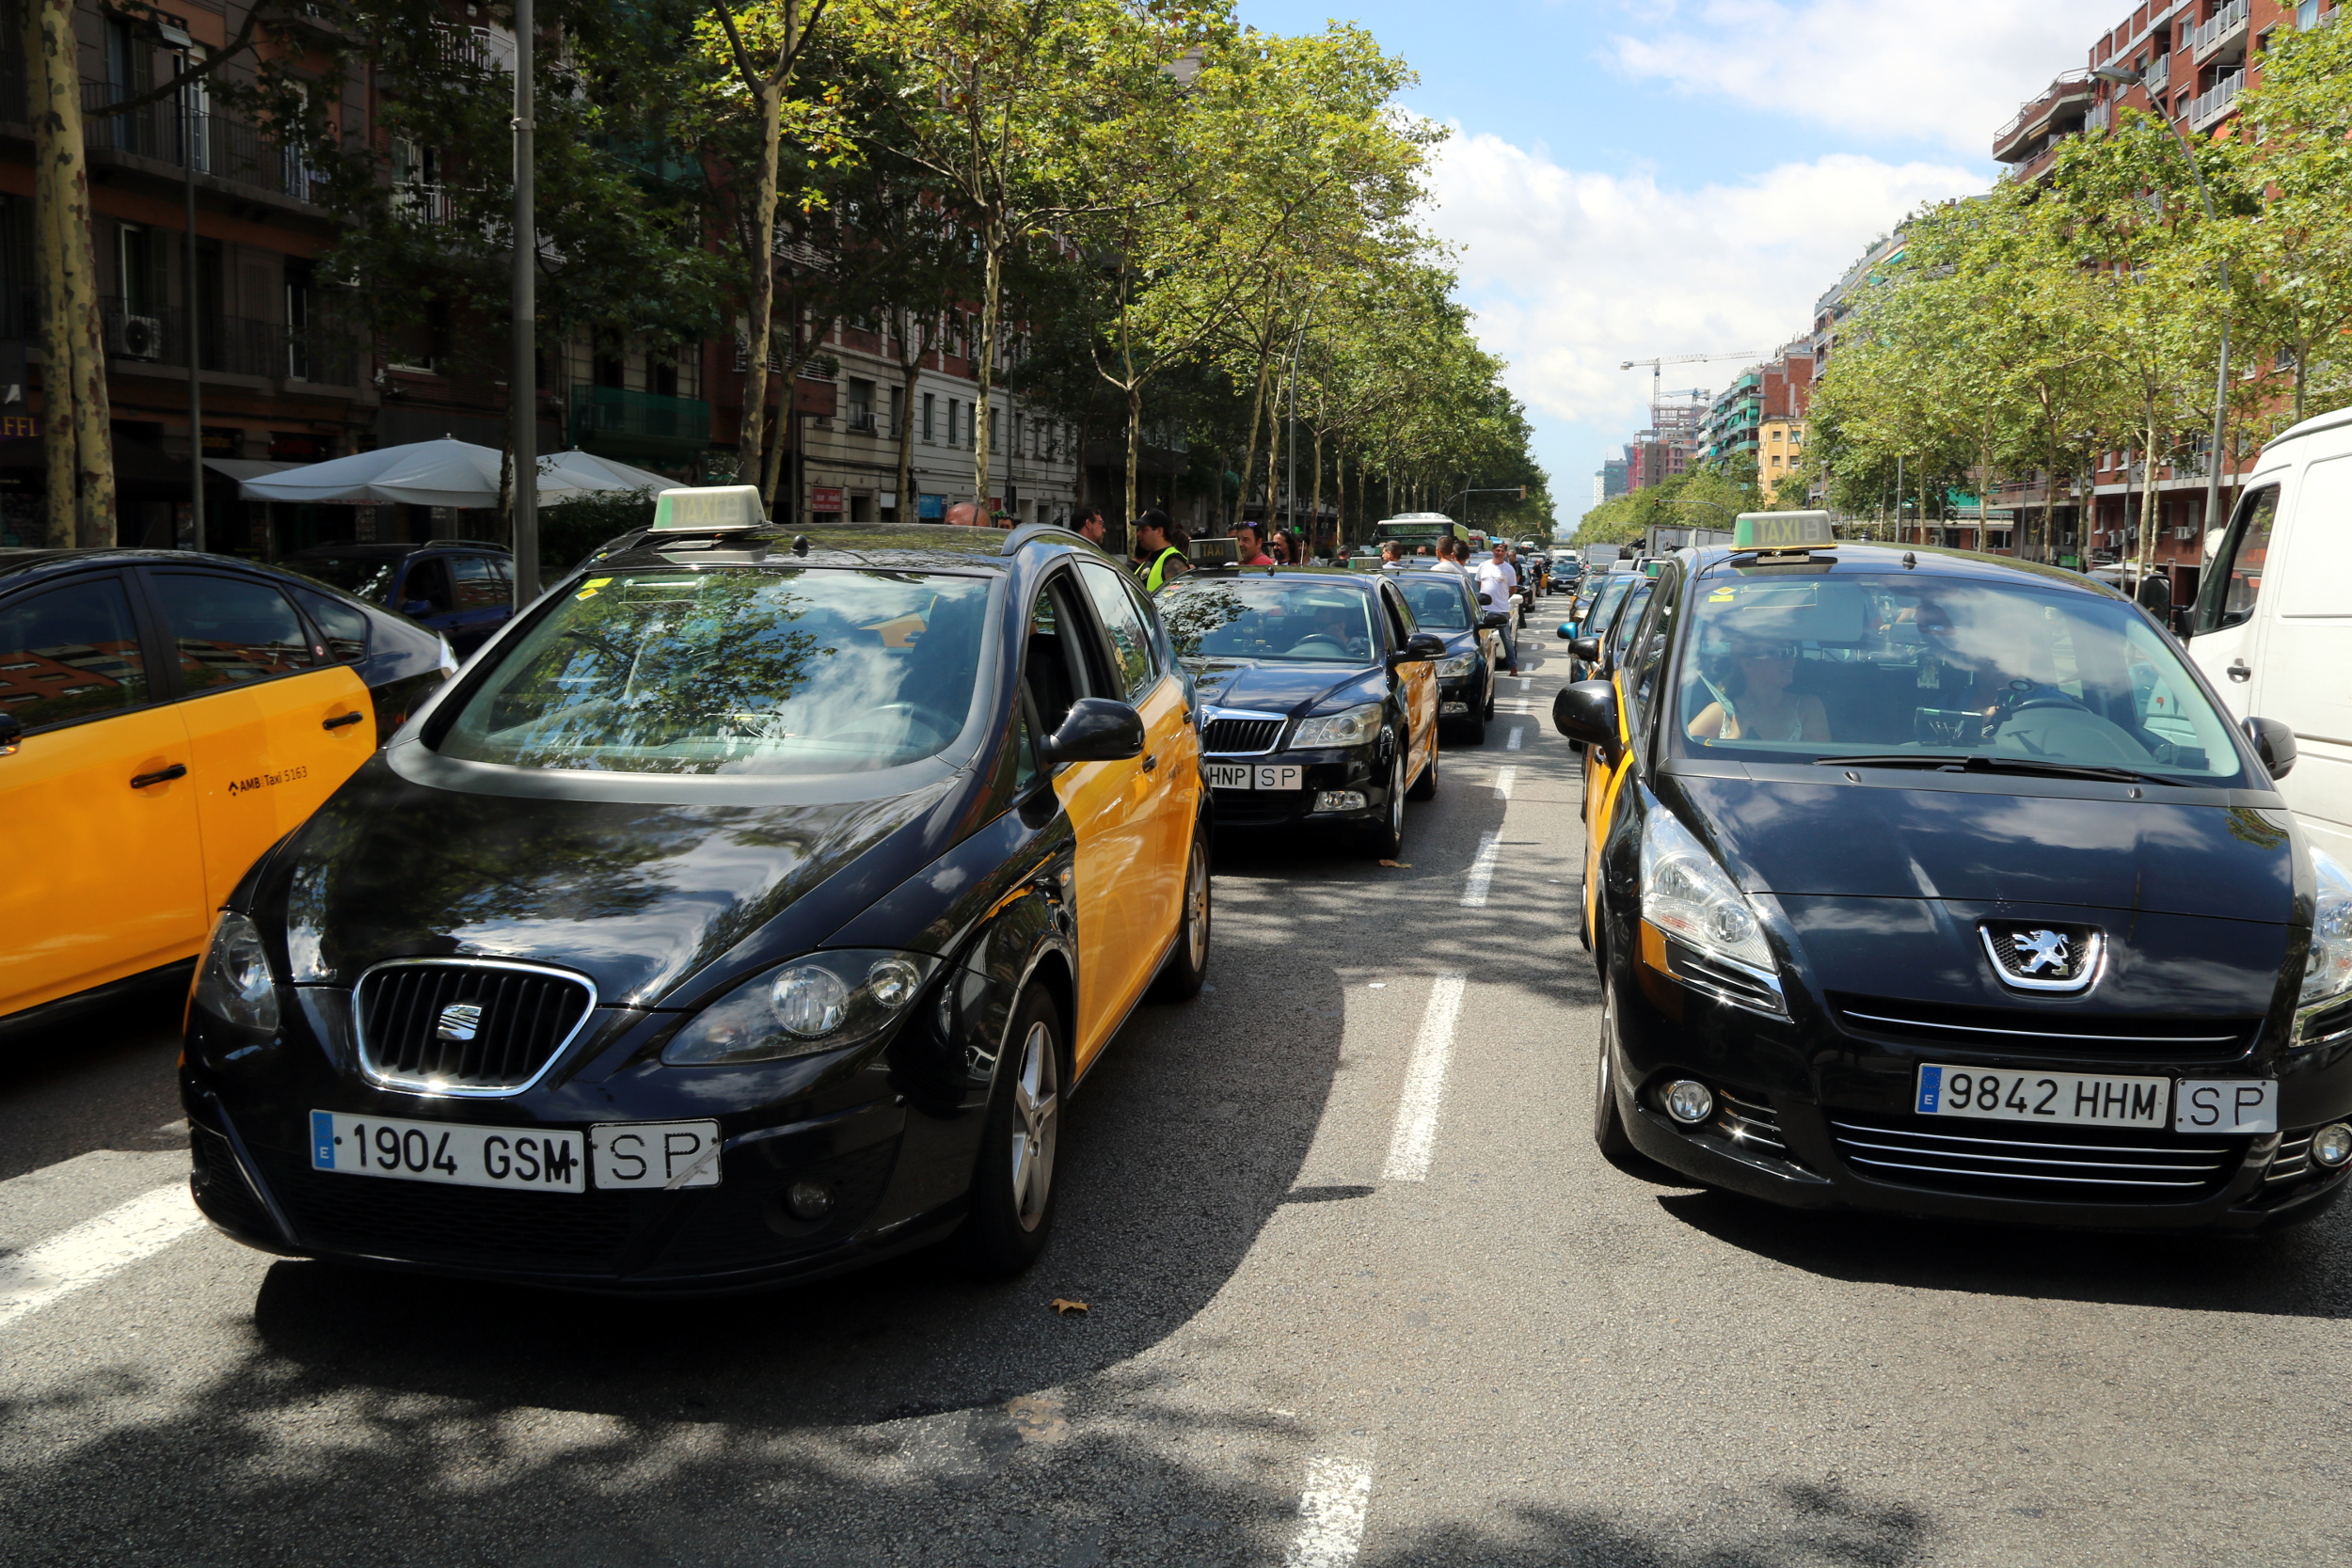 Taxis during the strike on Thursday (by ACN)